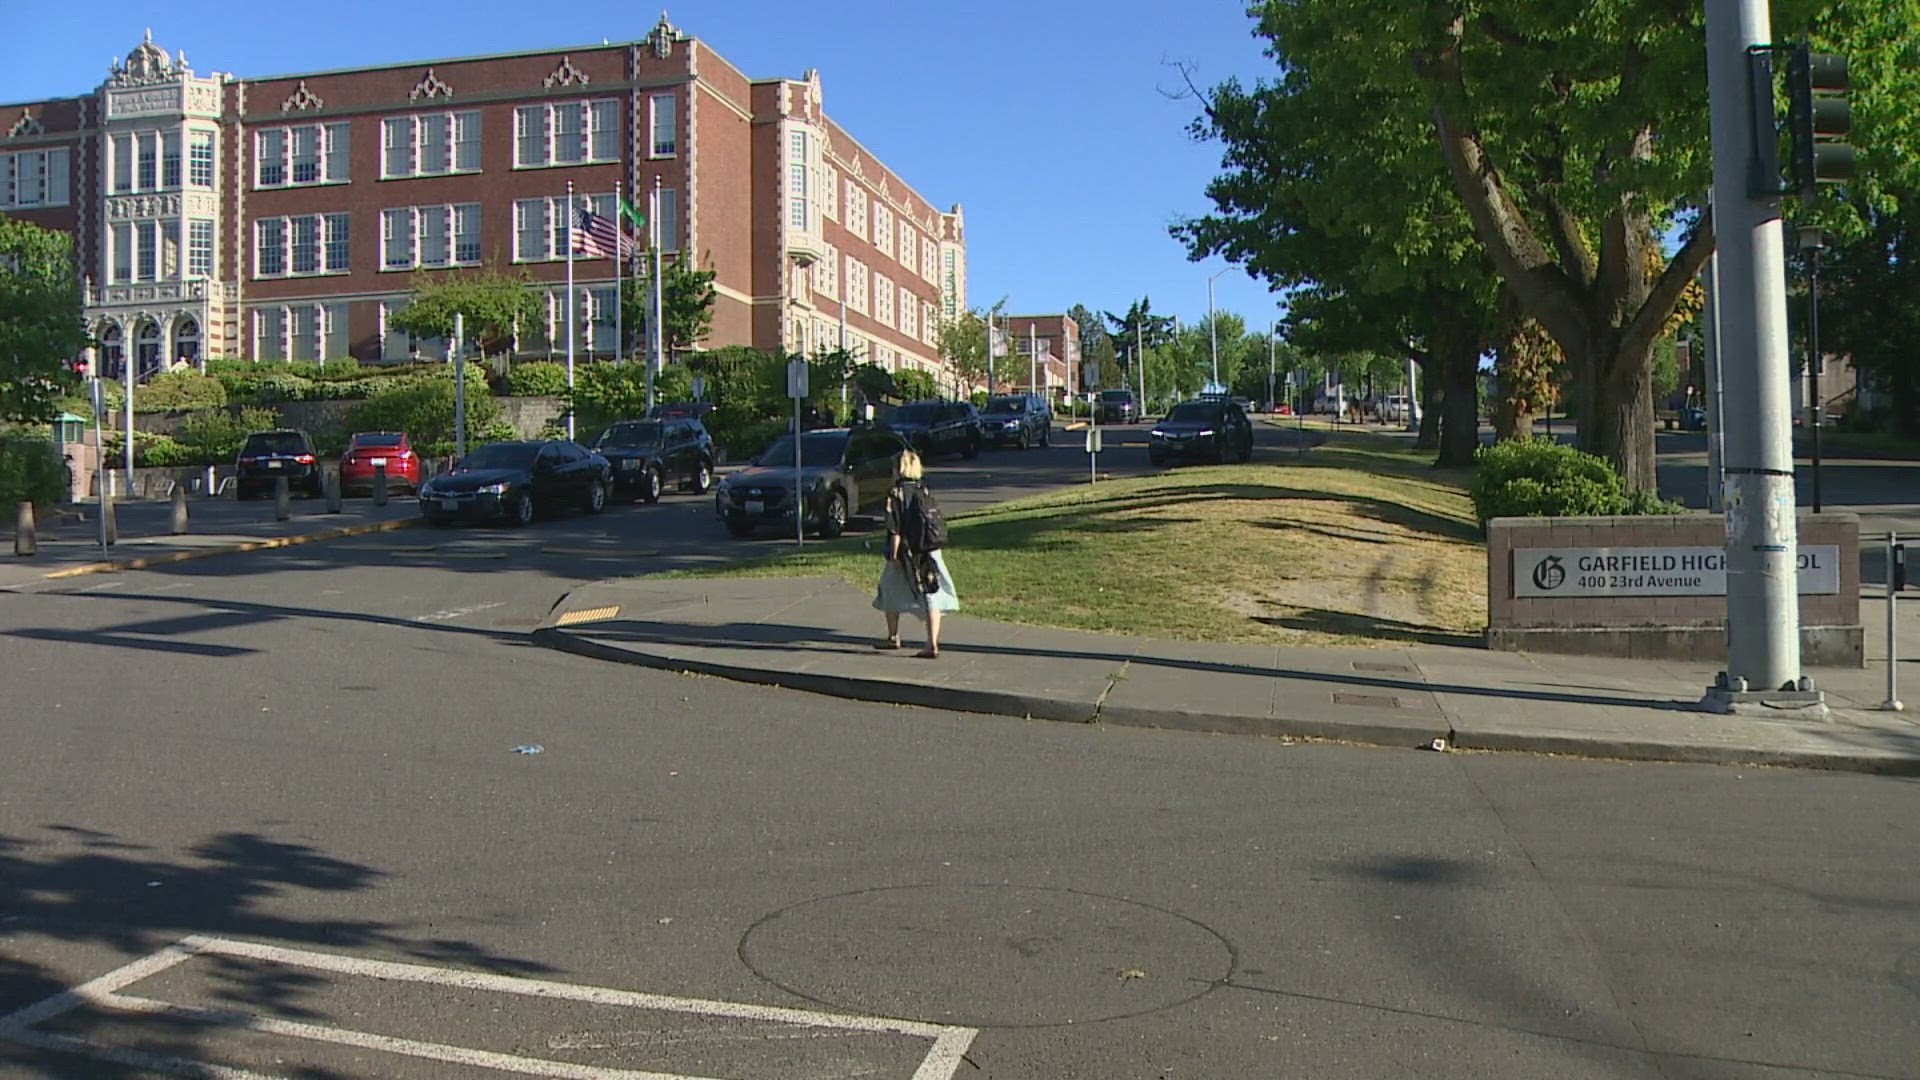 Garfield High families said they are feeling on-edge, so school district and city officials met with them on the campus to discuss security on Monday night.